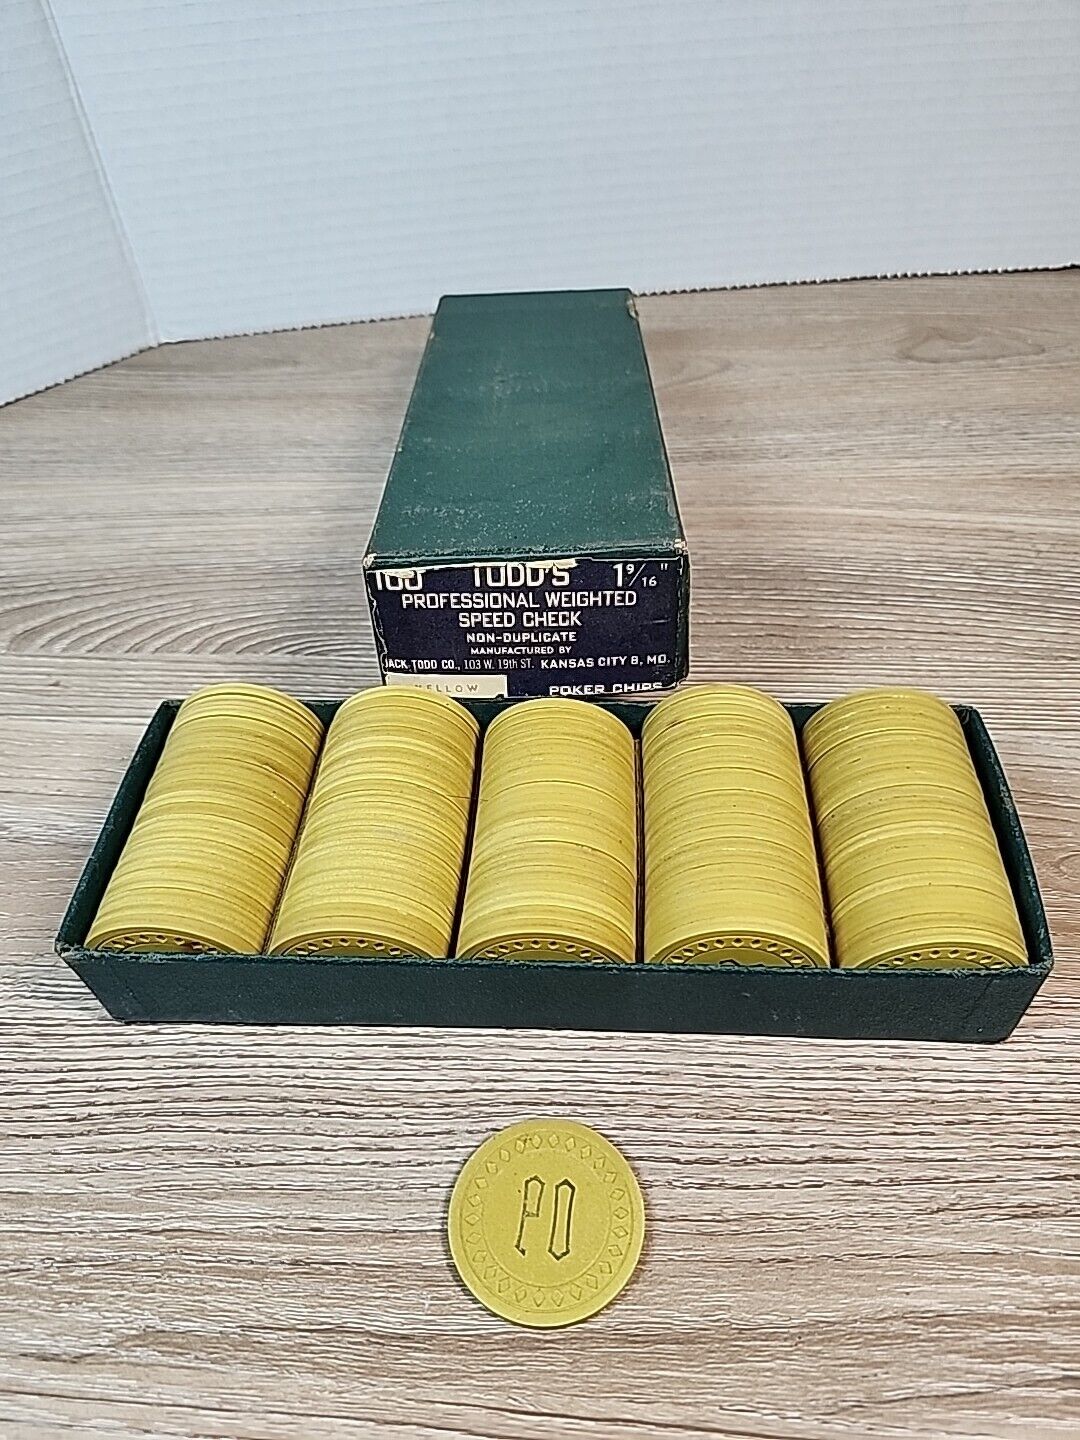 Vintage ILLEGAL P O UNKNOWN Yellow Diamond Stamped 105 POKER CHIPS Jack Todd Co